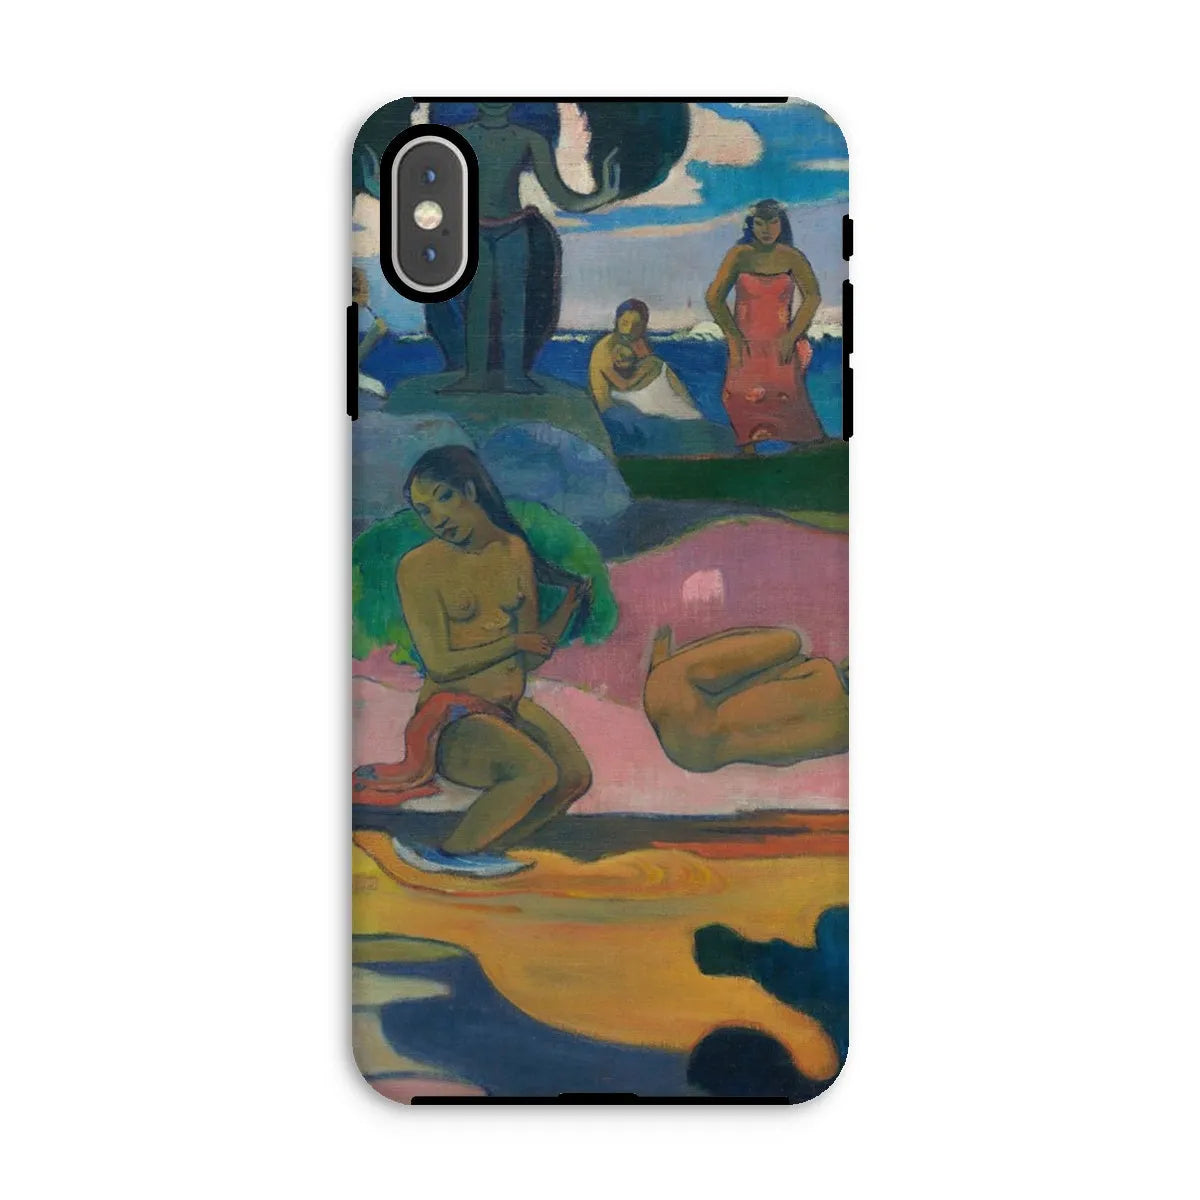 Day Of The God French Tahitian Art Phone Case - Paul Gauguin - Iphone Xs Max / Matte - Mobile Phone Cases - Aesthetic